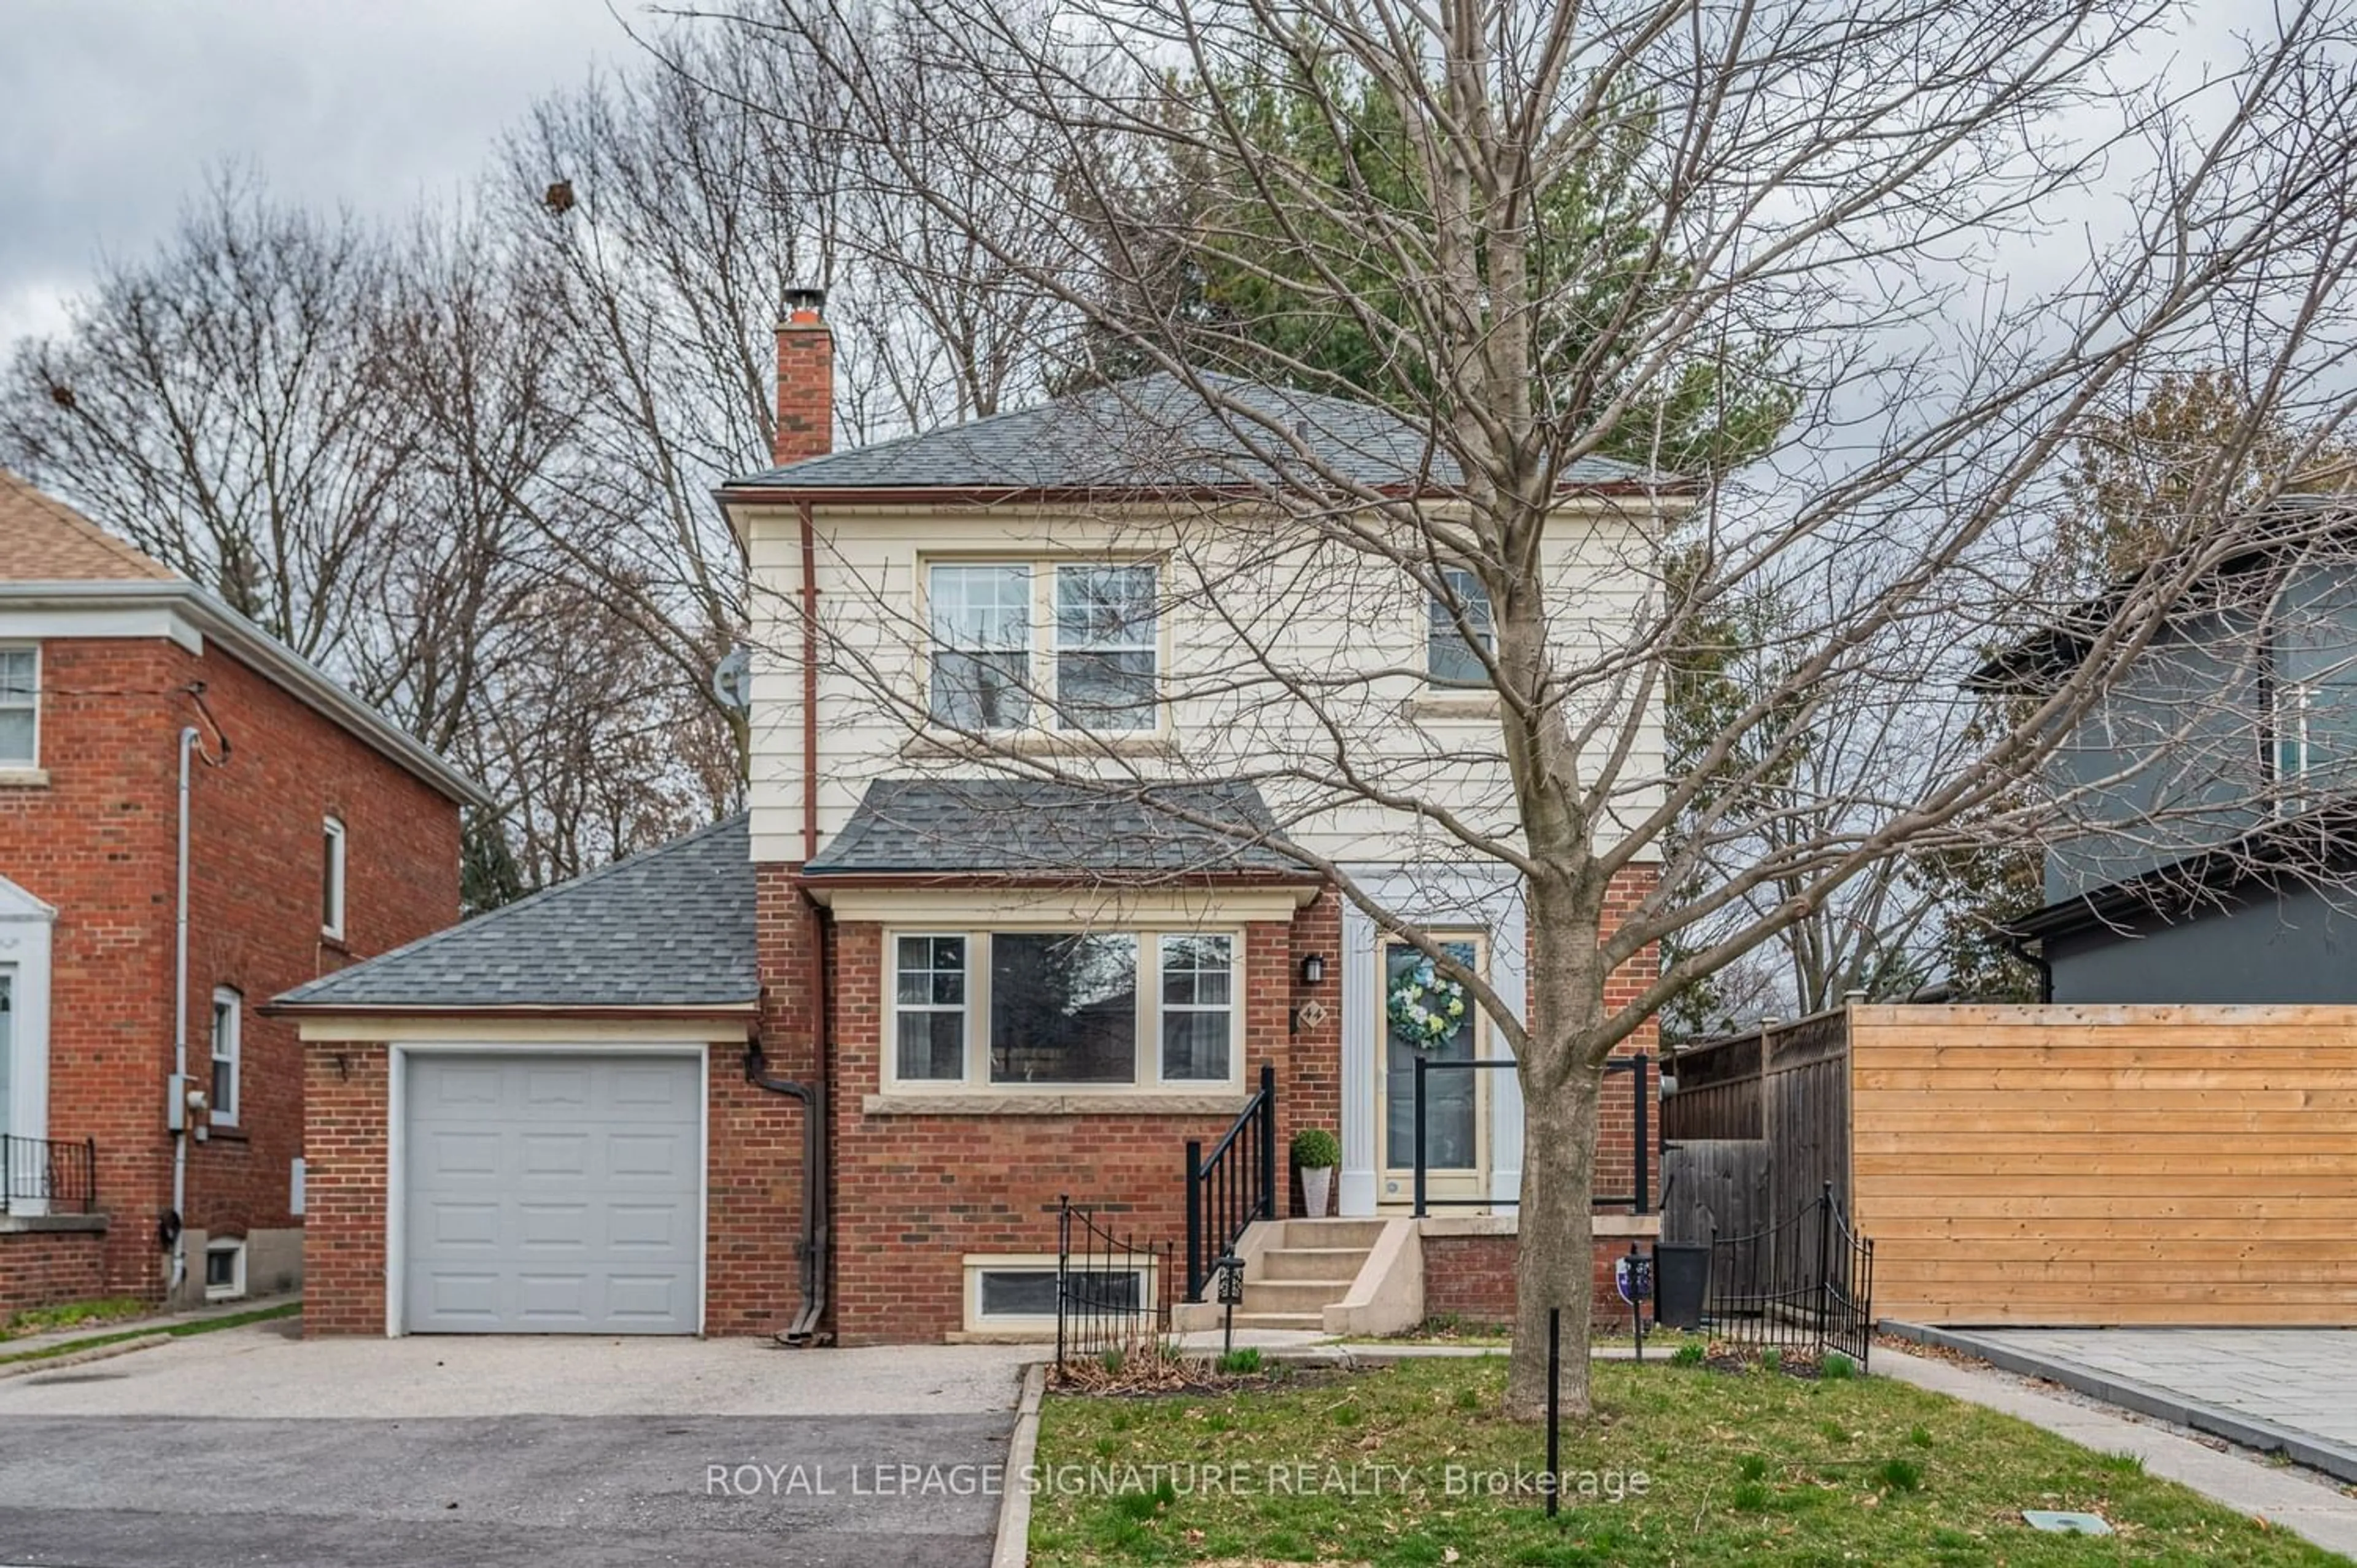 Home with brick exterior material for 44 Parkview Hill Cres, Toronto Ontario M4B 1P9